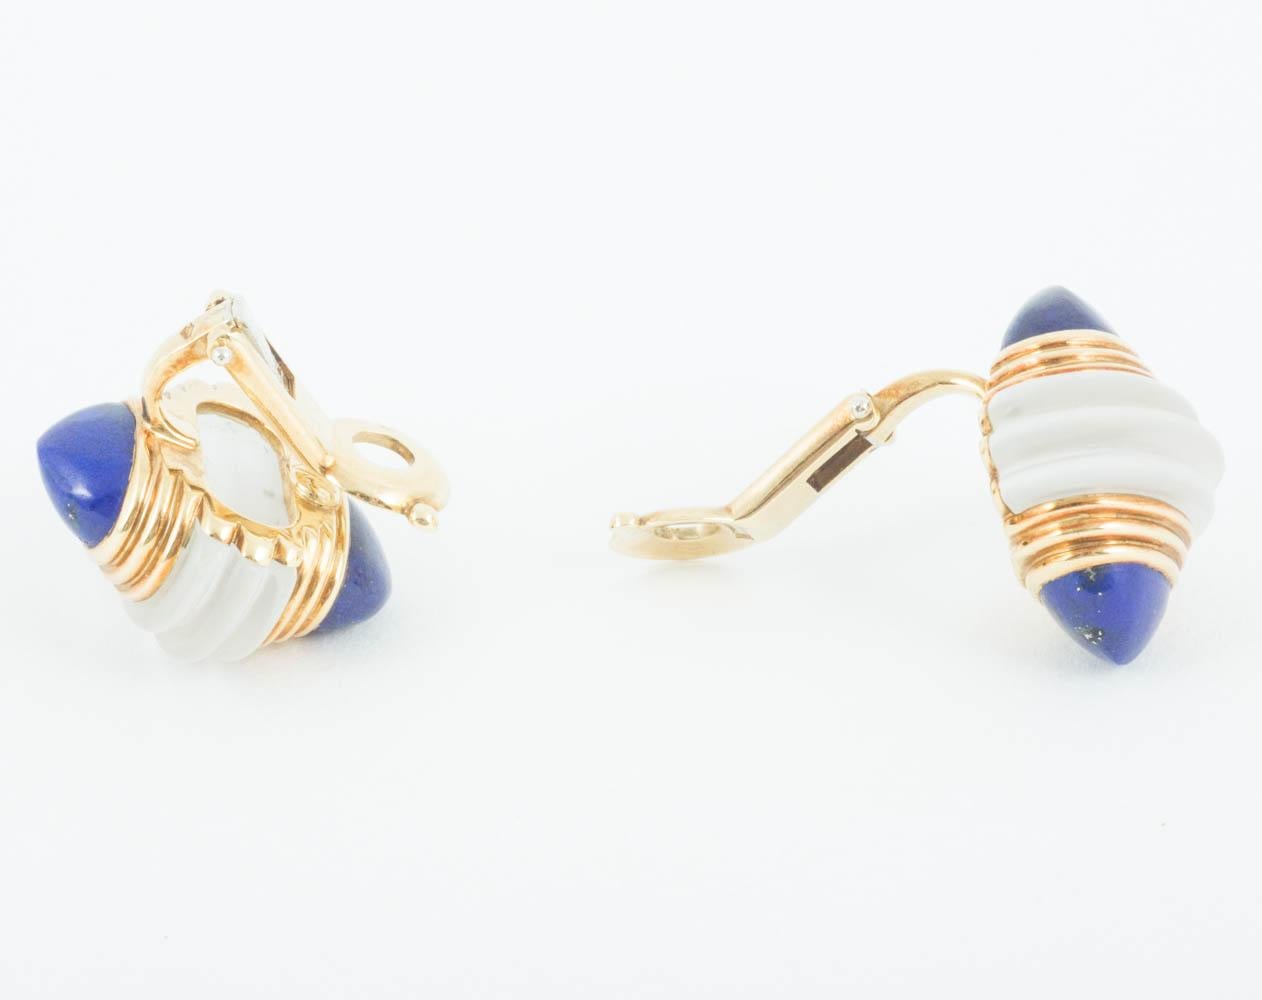 Boucheron Clip Earrings, Frosted Crystal & Lapis Lazuli in 18k Gold, French 1950 In Good Condition For Sale In London, GB